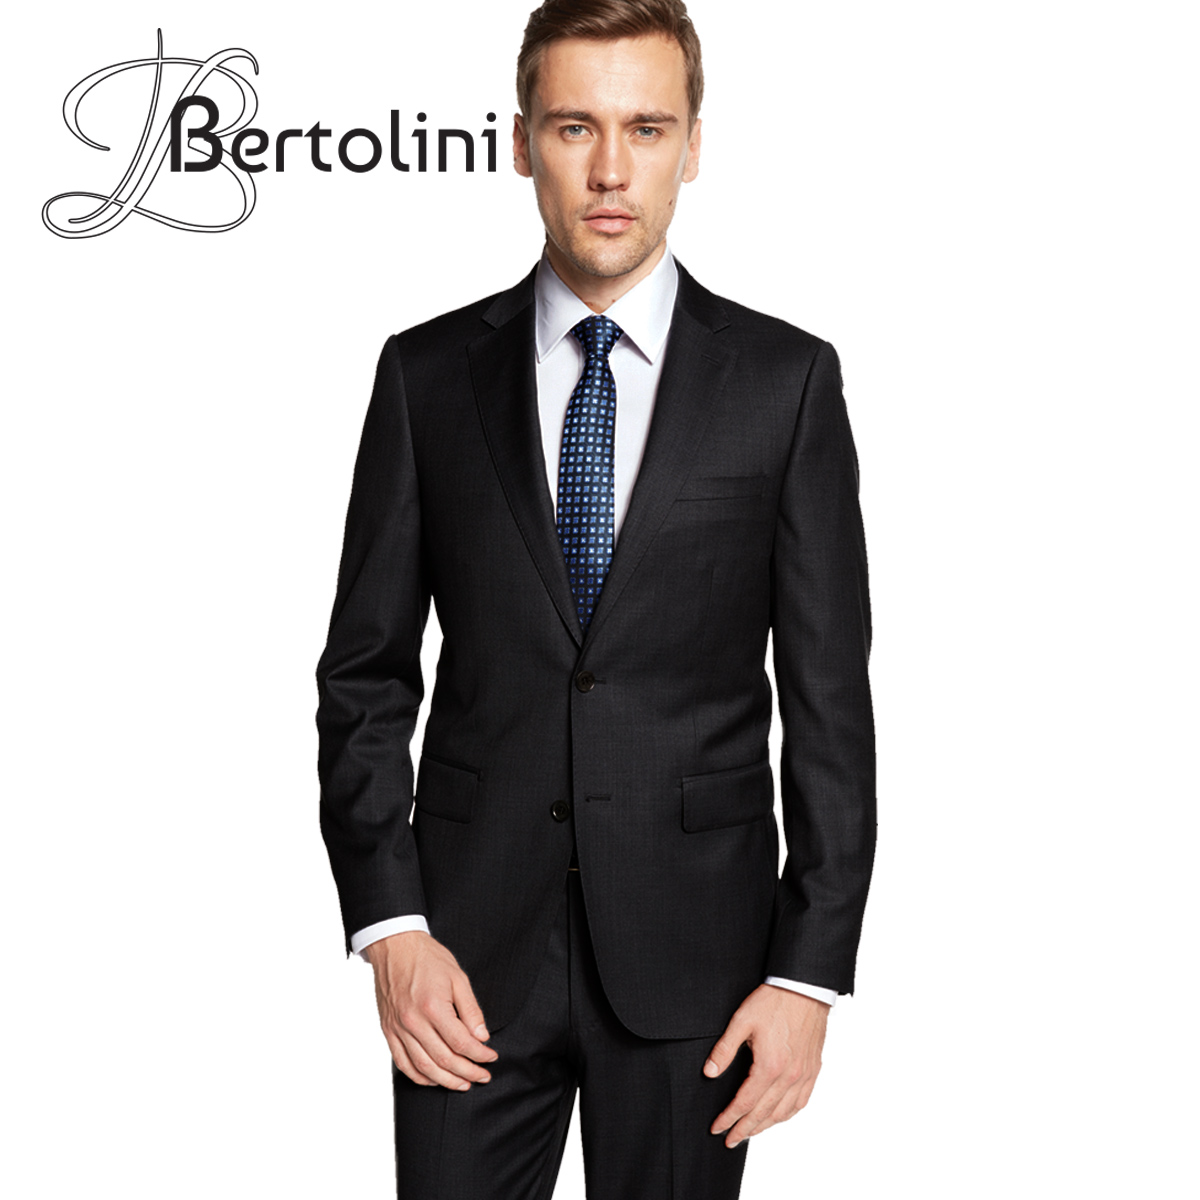 House of Gentlemen - THE ITALIAN SLIMFIT 3-PIECE SUIT USD $100 Available in  Navy Blue, Black, Grey, Royal Blue, Light Blue, Light Brown, Green. So  Hurry While Stocks Last Become a Gentlemen